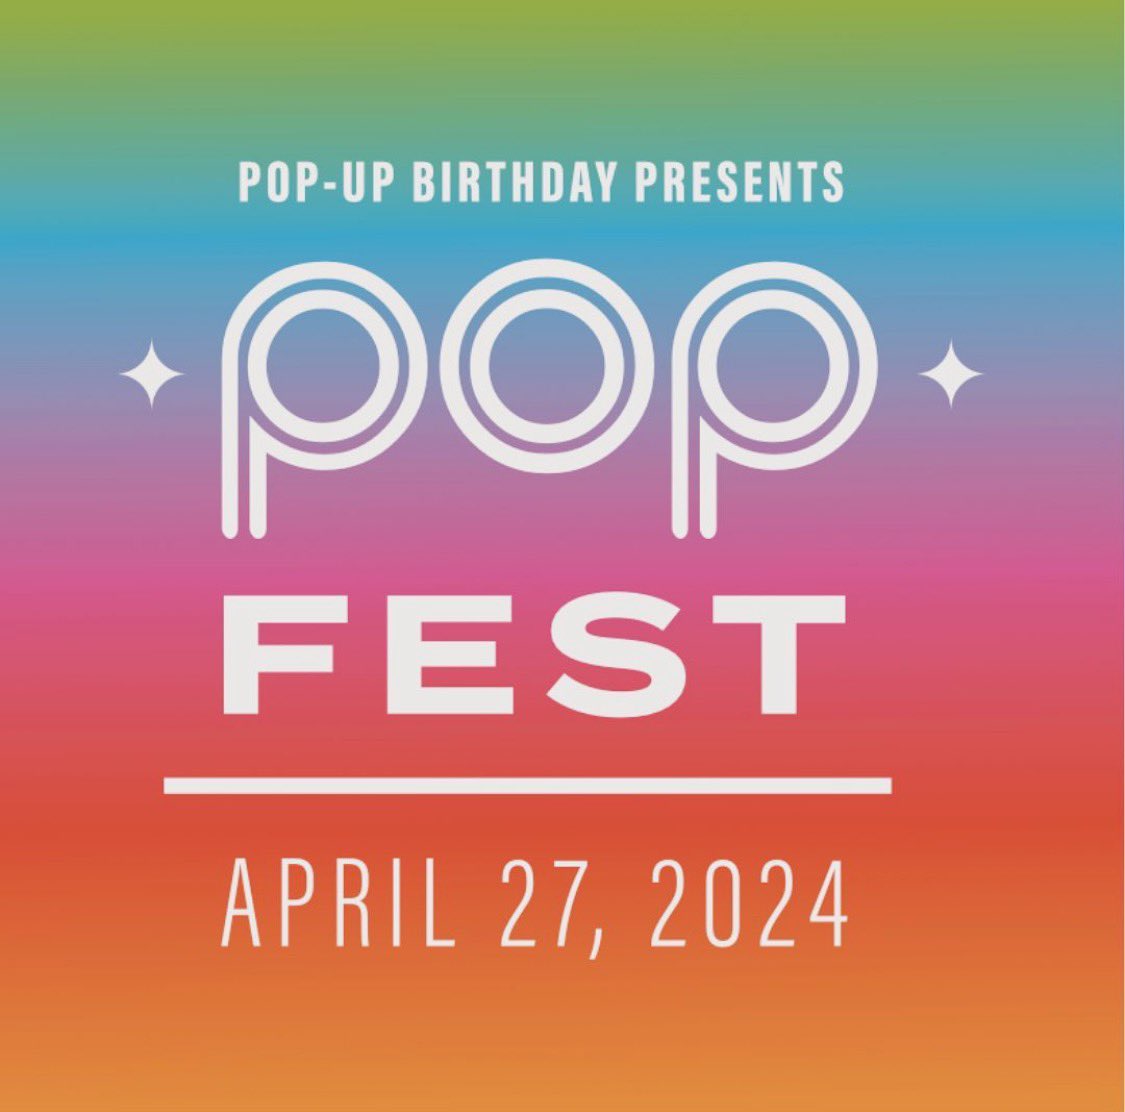 The @popupbirthday 2024 Birthday Ball tickets are almost sold out. Get yours today by clicking the link.  @texasonefund bit.ly/3O76Kee